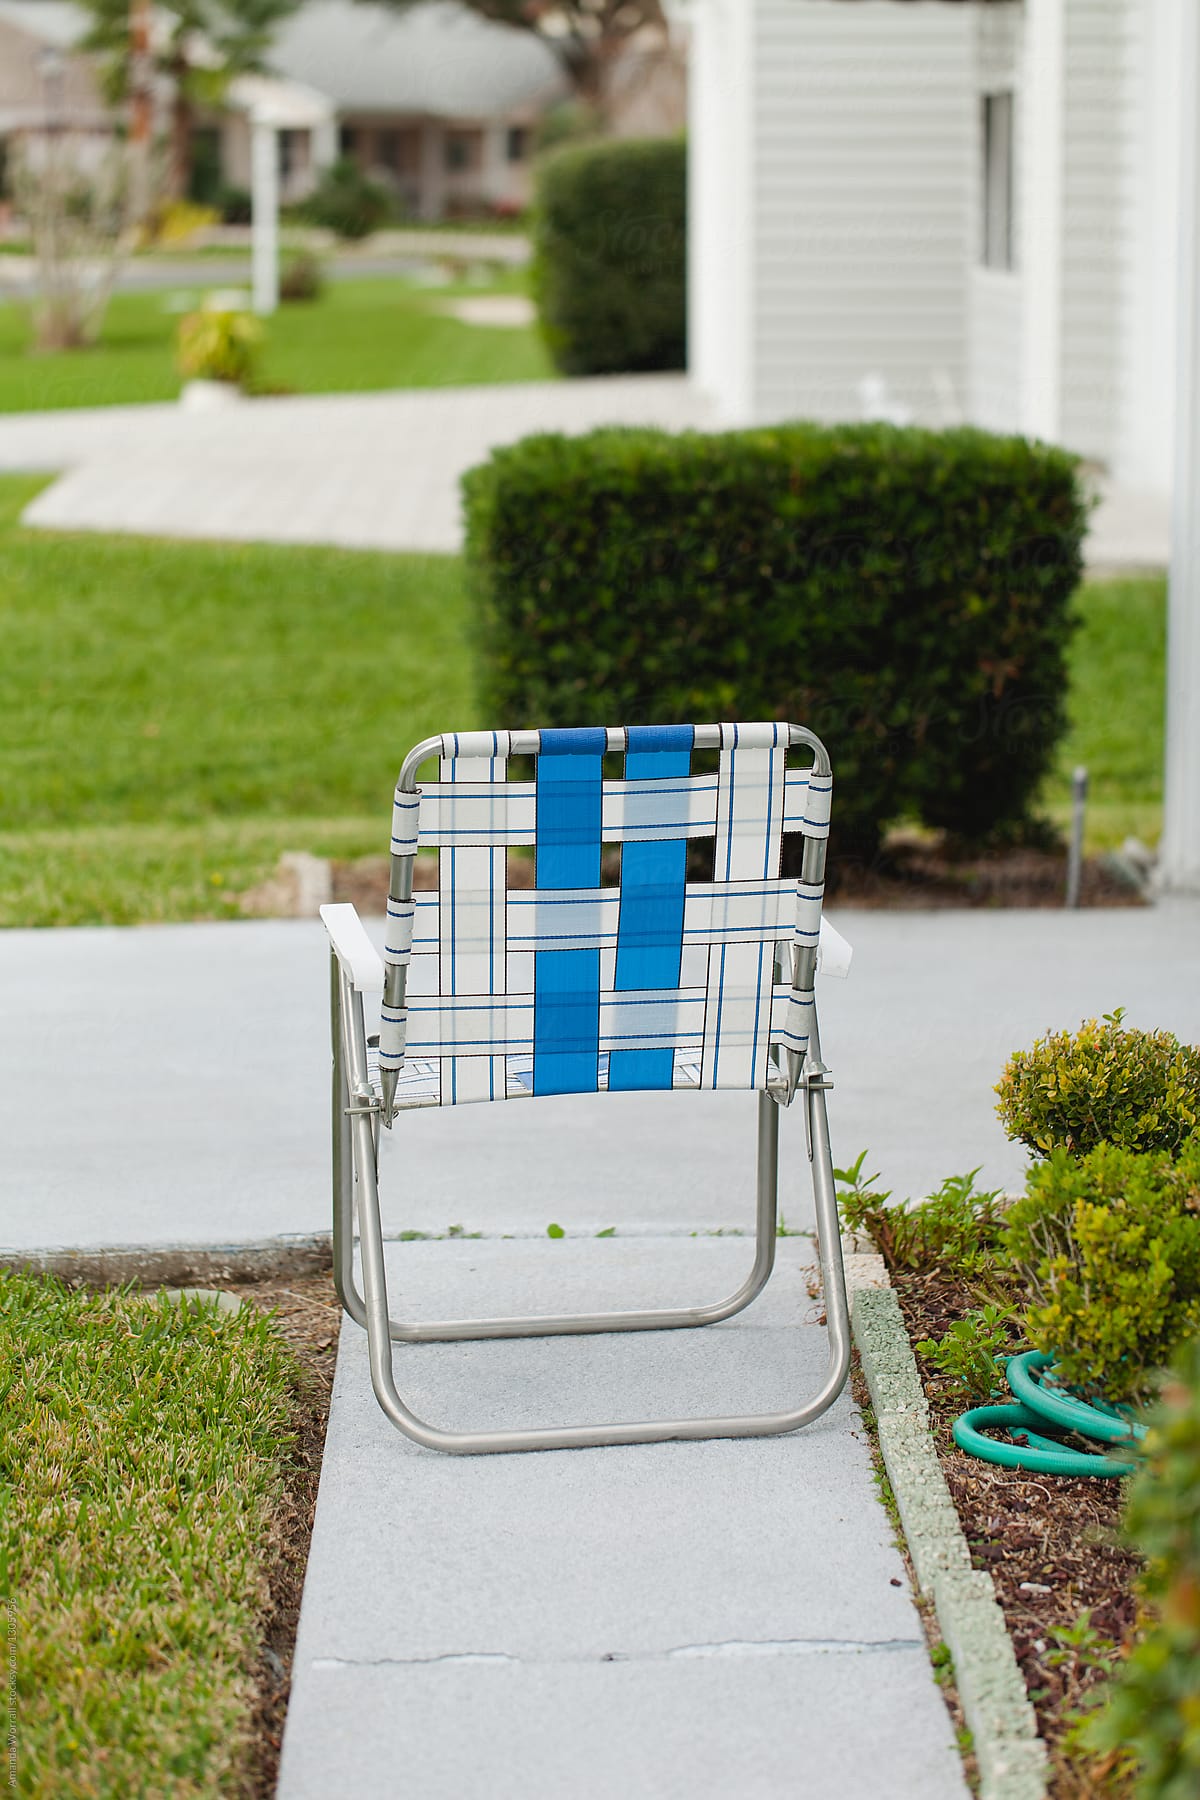 Lawn Chair on sidewalk in front of a home